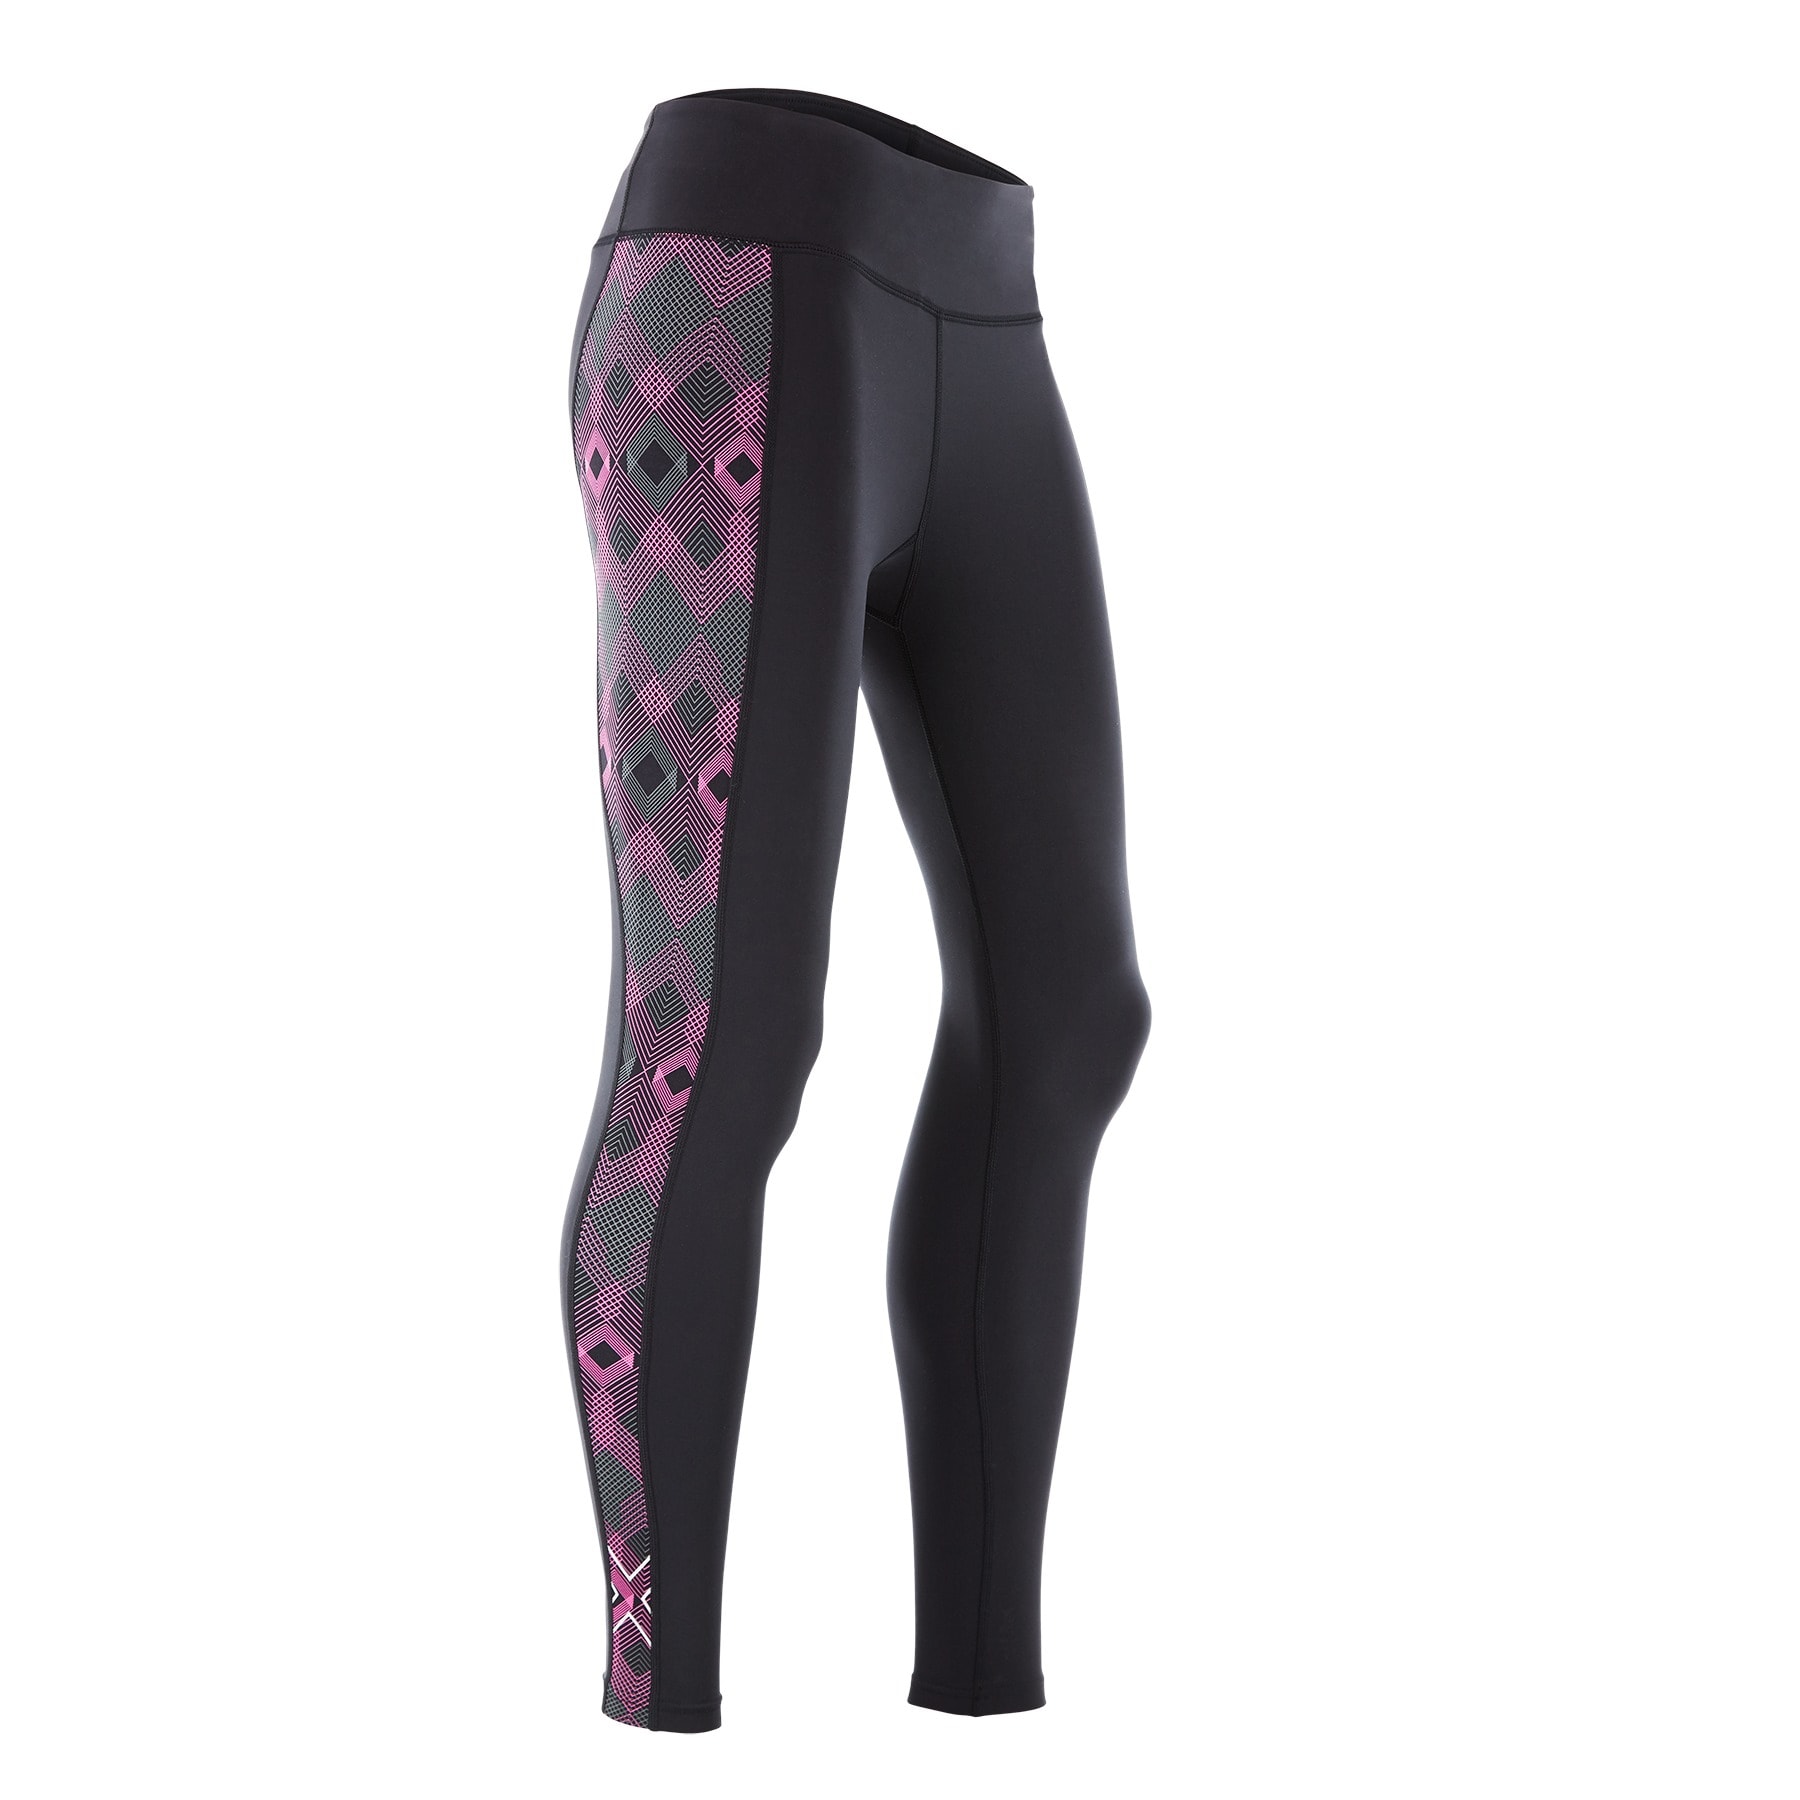 lykke tetraeder Baron Buy 2XU Fitness Compression Tights Women from Outnorth